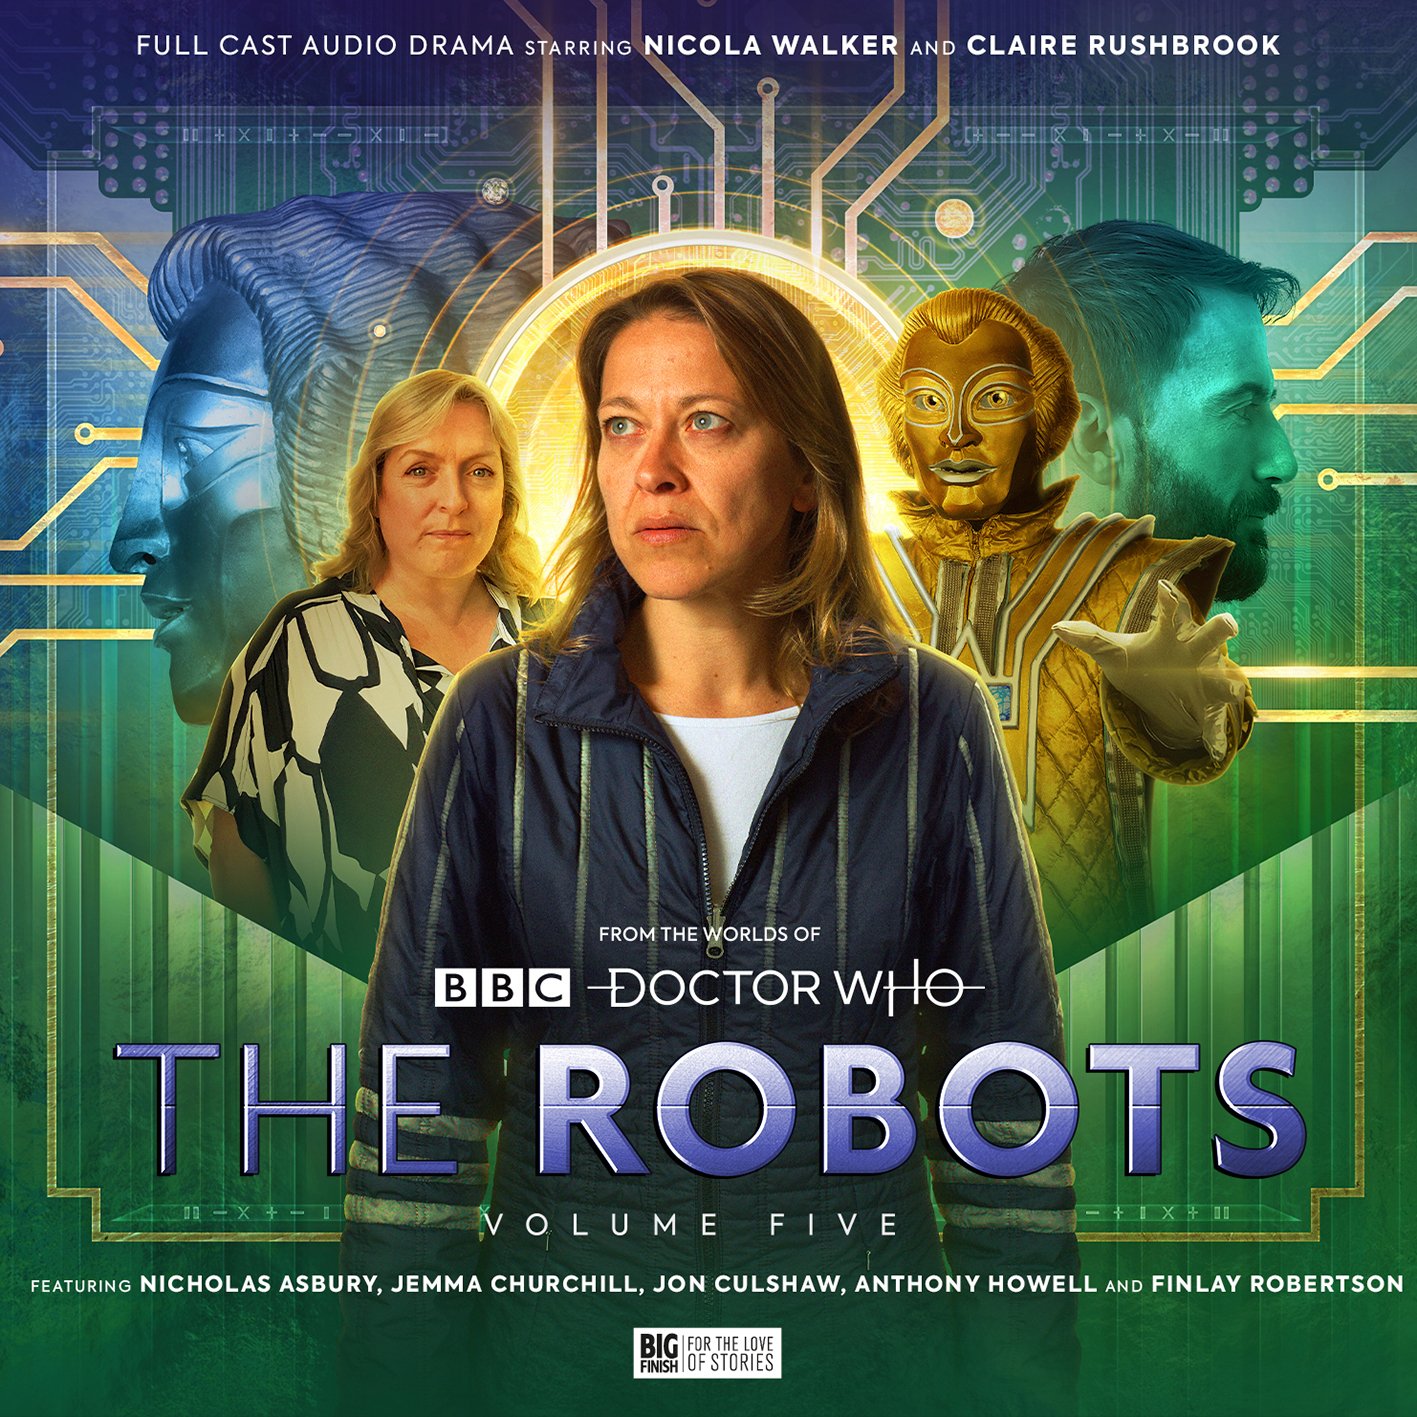 Coming Soon from Big Finish: The Robots Volume 5